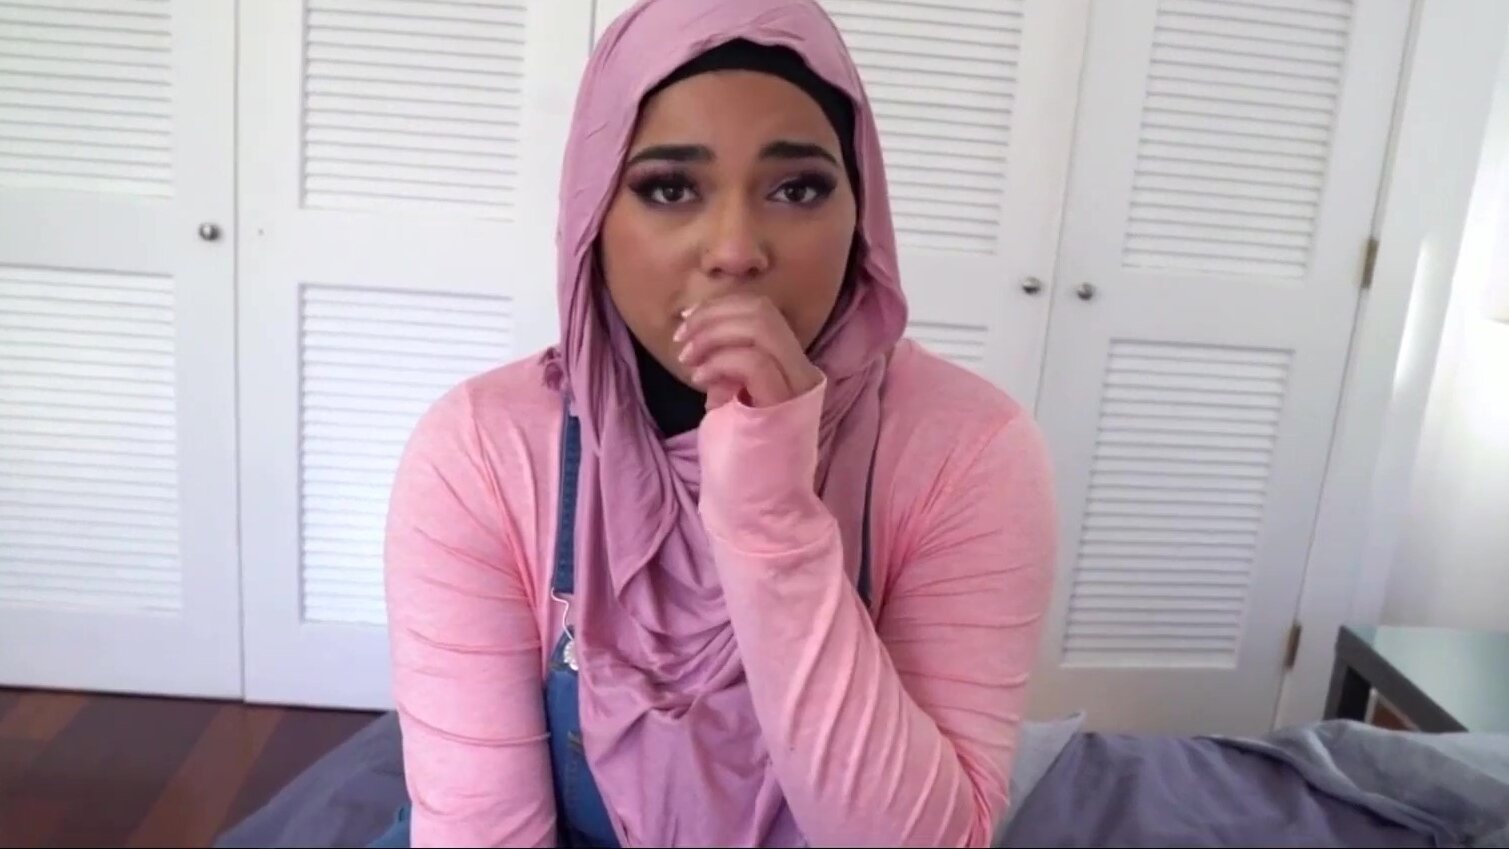 Shy Curvy Busty Muslim Teen In Hijab Asked Her Step-cousin To Take Her Virginity pic image